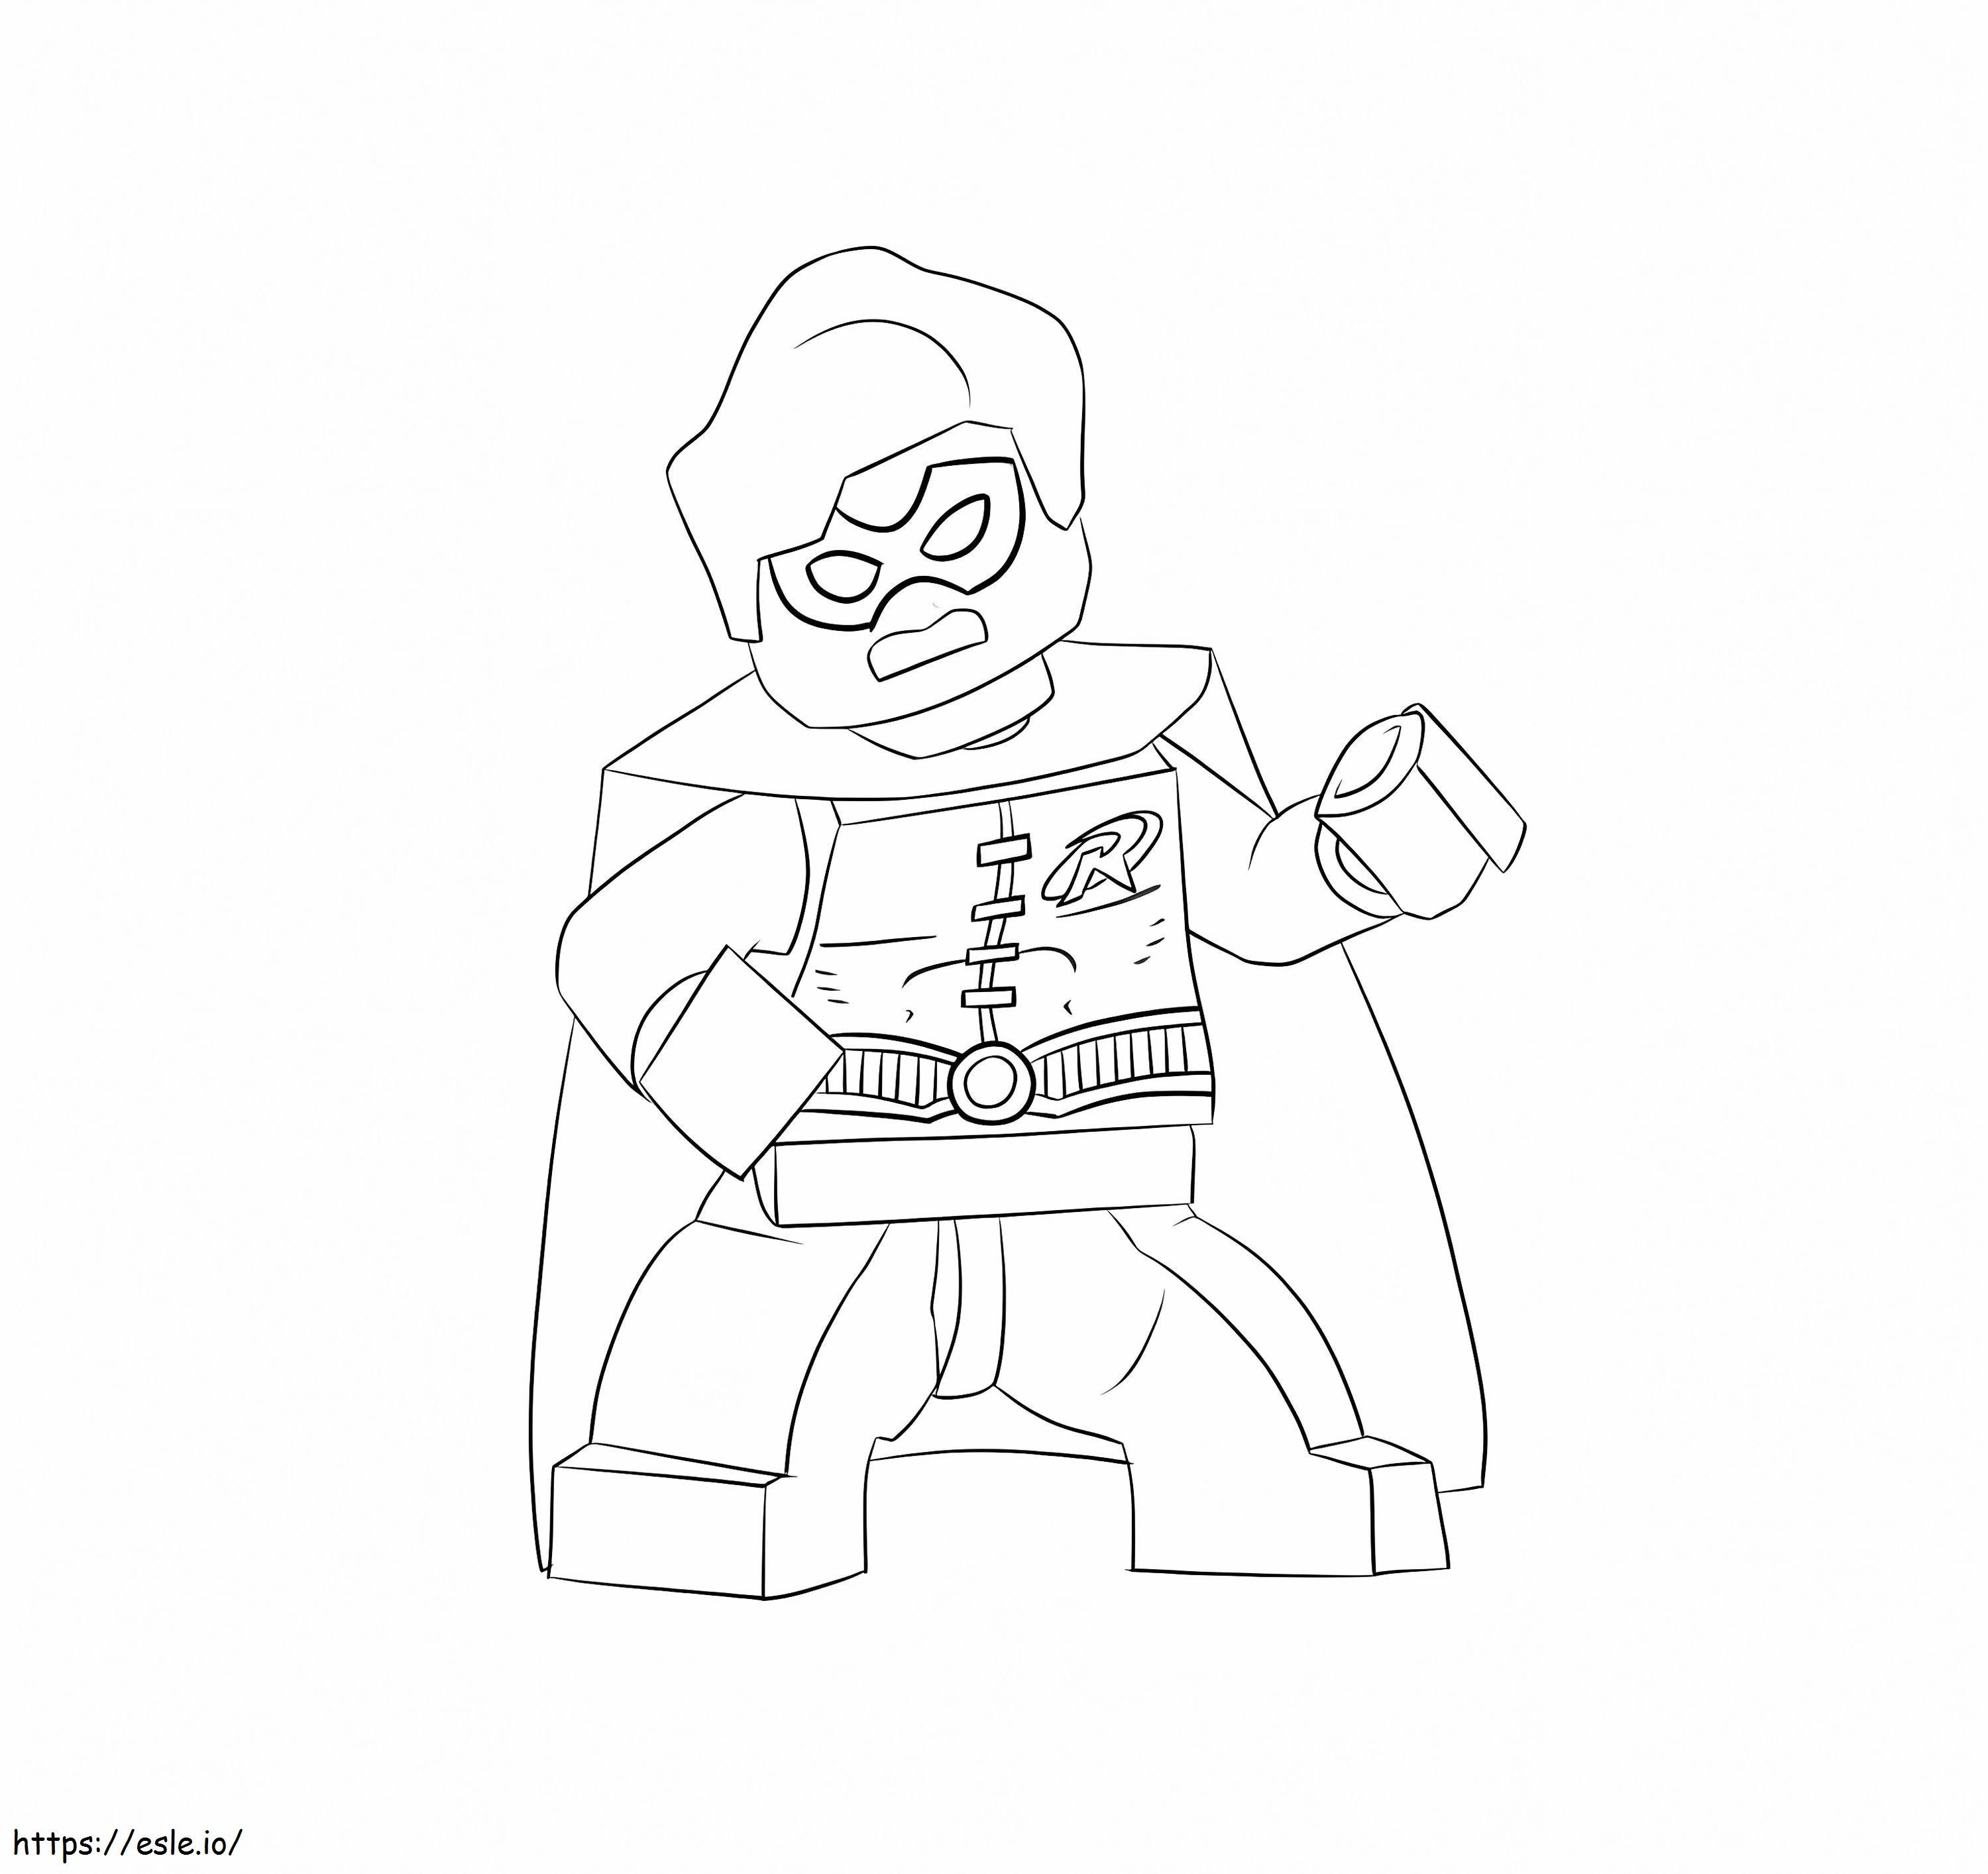 Angry Lego Robin coloring page